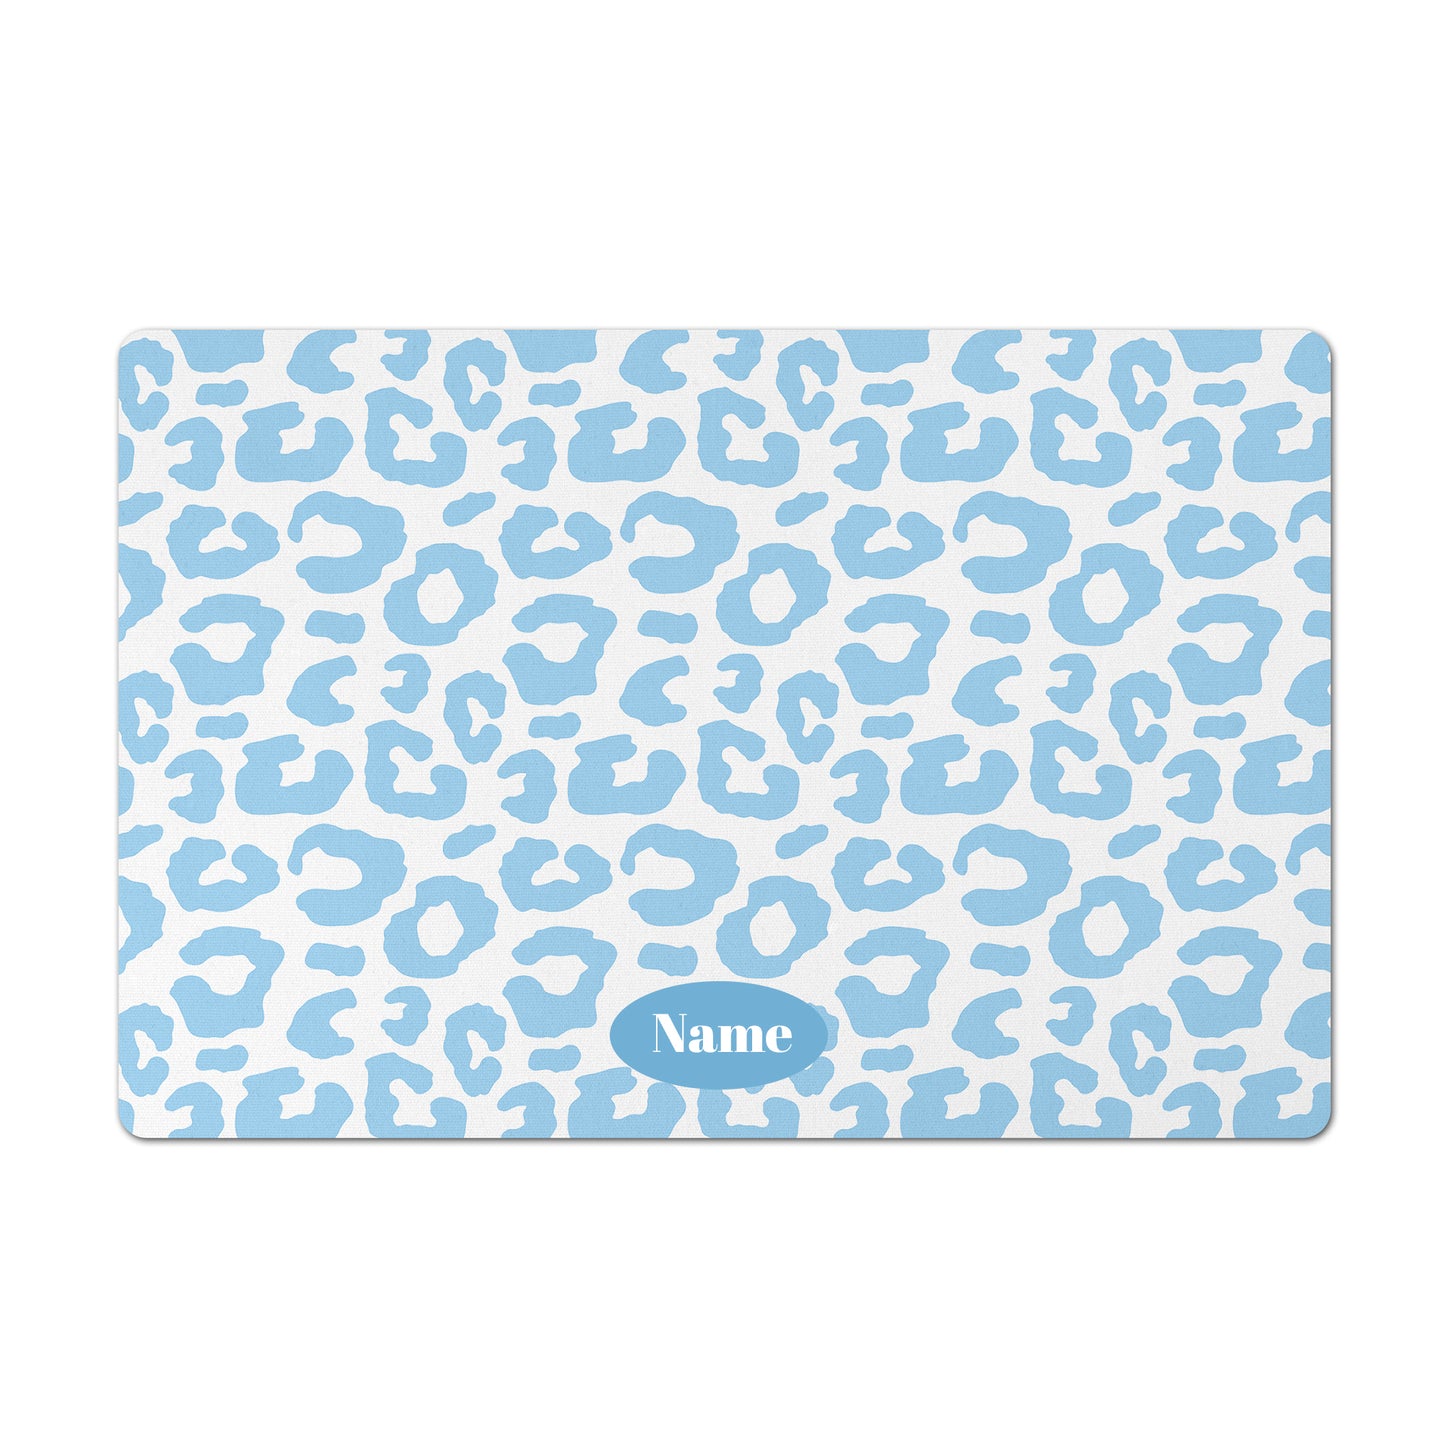 Personalized Leopard Pet Bowl Mat, Baby Blue and White